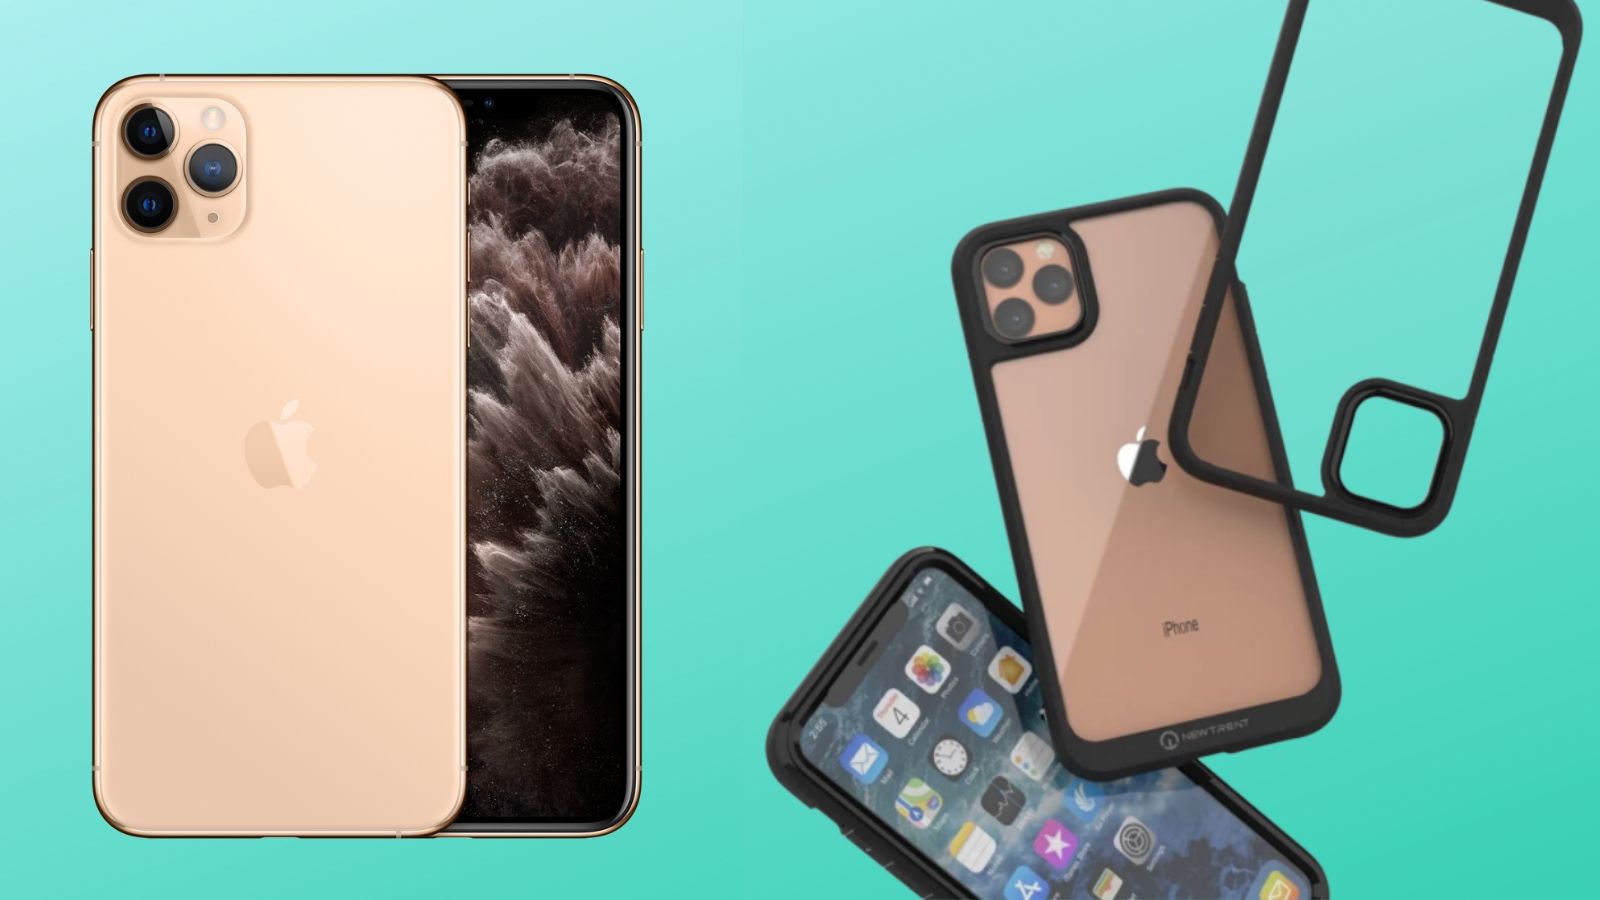 8 Best Iphone 11 Pro Max Cases To Buy In 2019 For Apple S Best Iphone